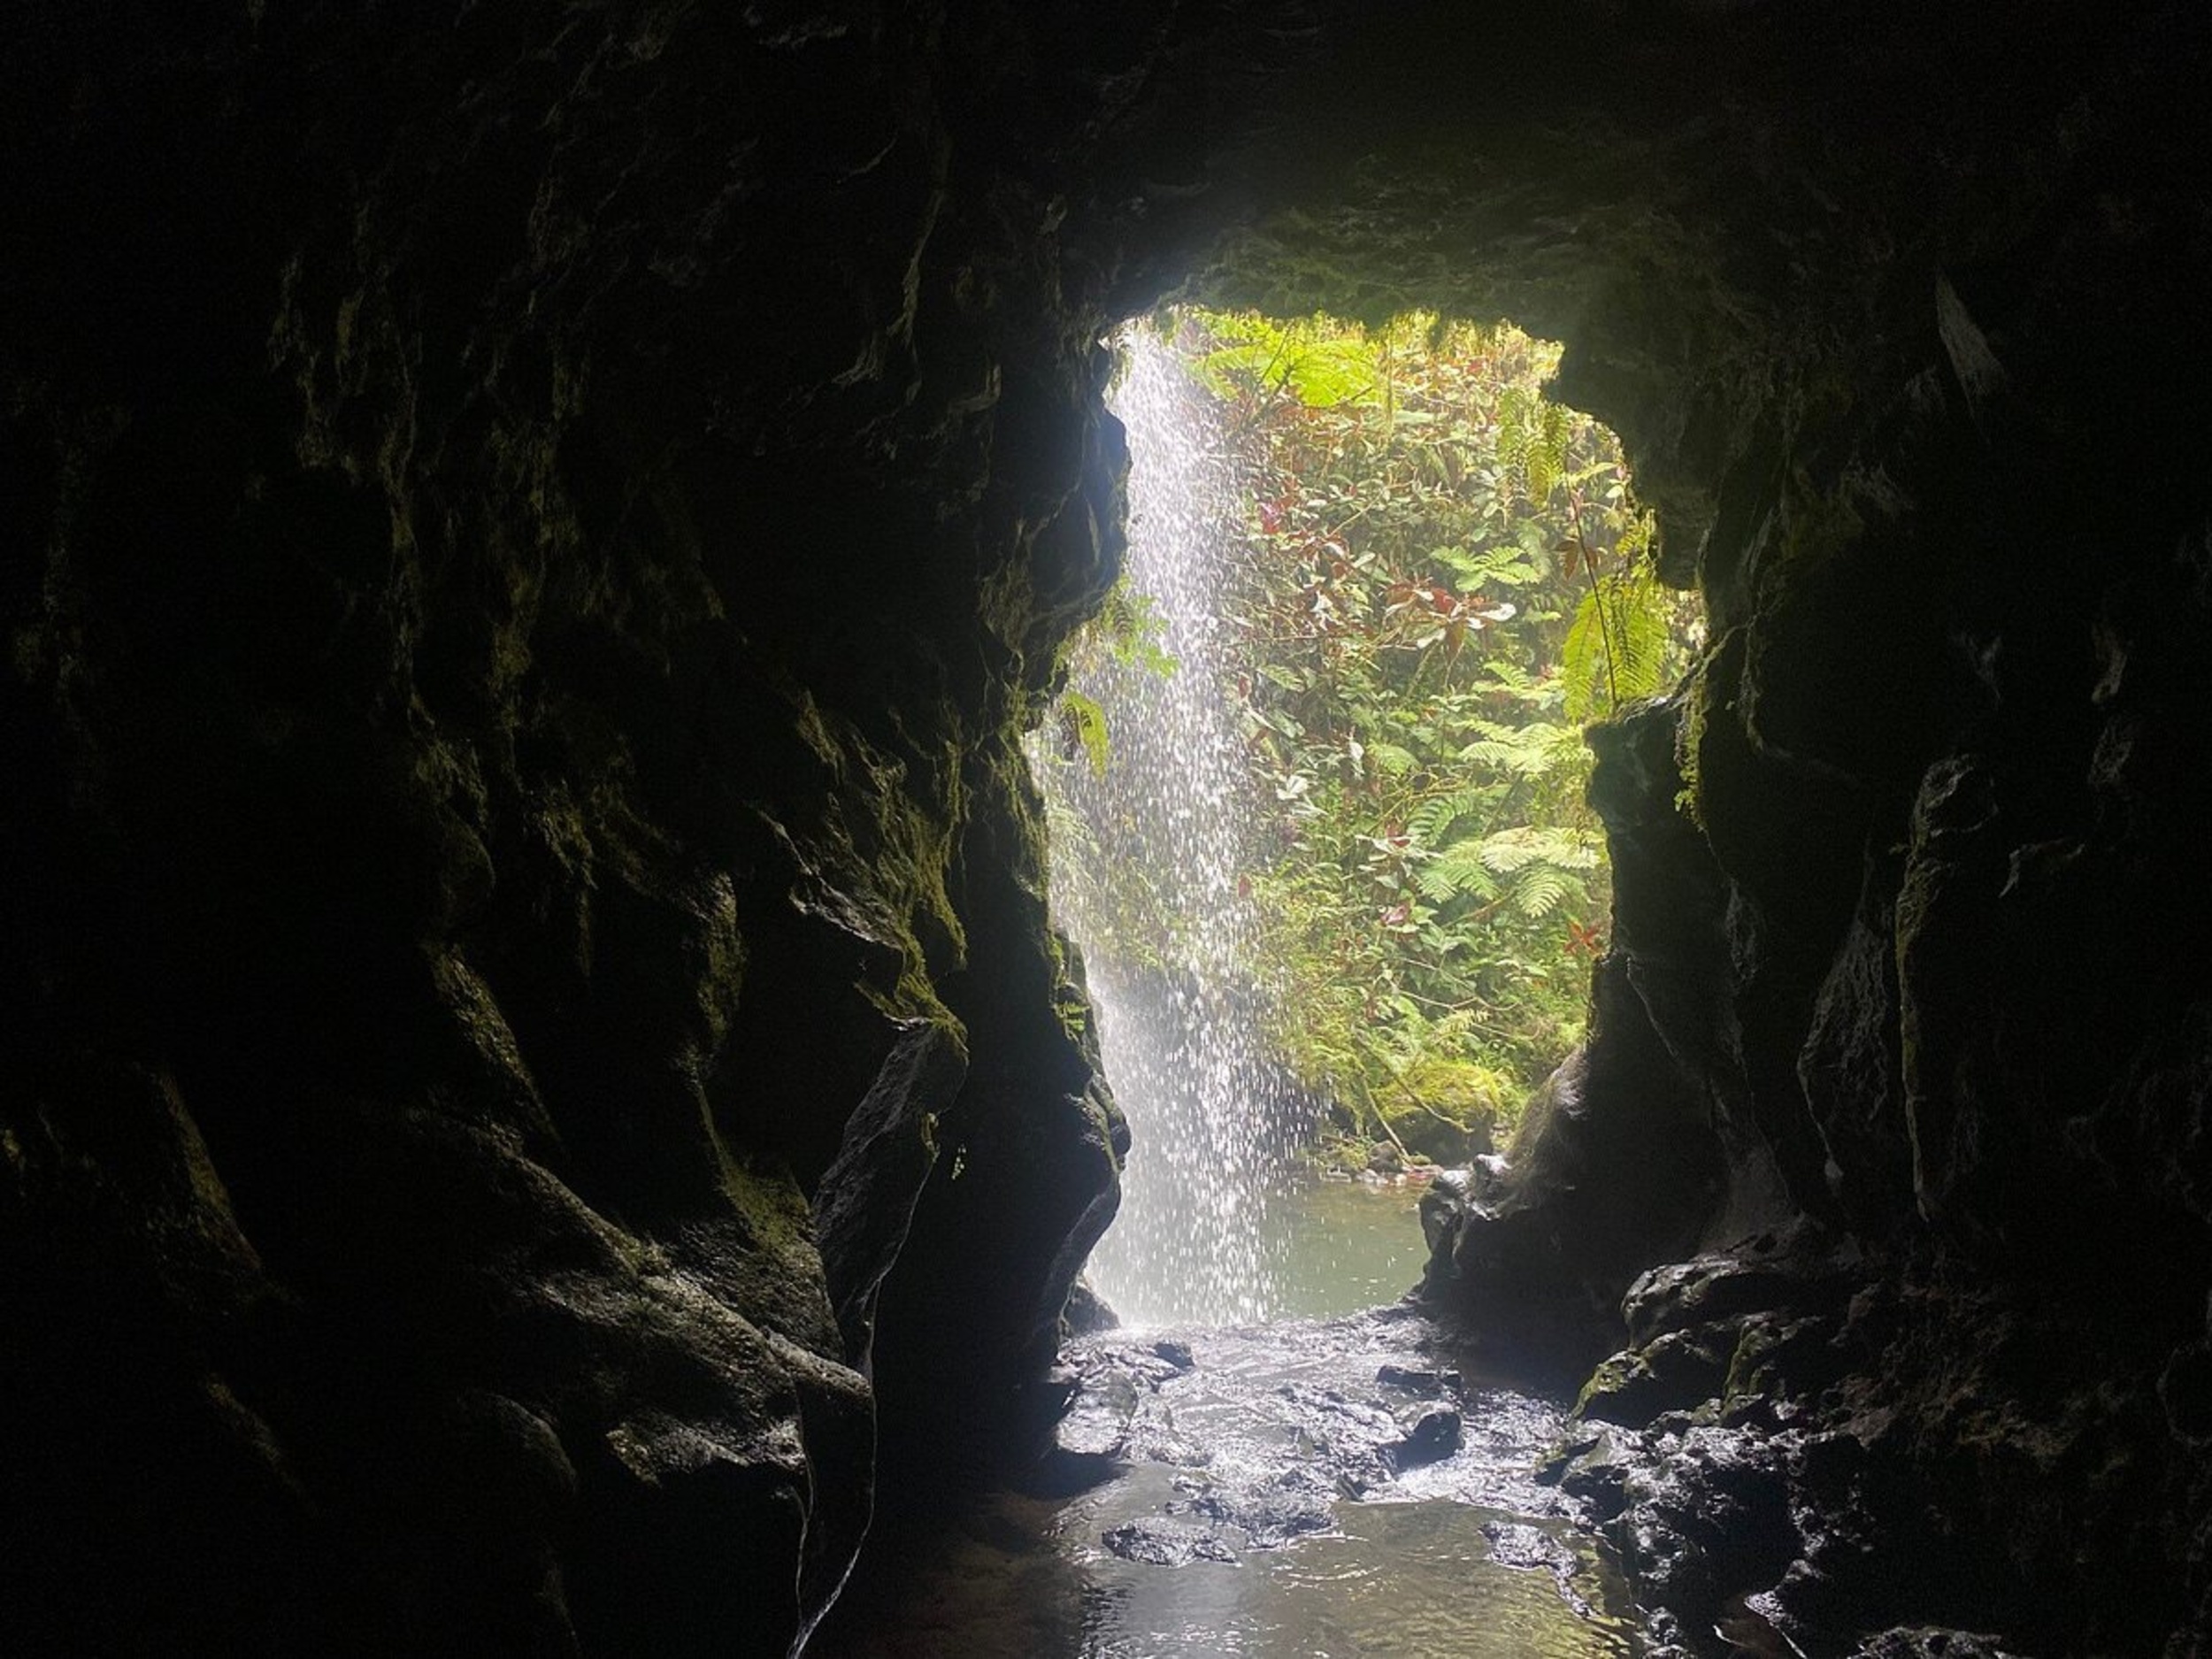 <p>Is the ocean not cold enough? Pop into one of these caves, which are basically cold springs with volcanic rocks. You'll want to ask a local how to get there, but taking a dip in one of these cold pools is well worth the stop.</p><p><a href='https://www.msn.com/en-us/community/channel/vid-cj9pqbr0vn9in2b6ddcd8sfgpfq6x6utp44fssrv6mc2gtybw0us'>Follow us on MSN to see more of our exclusive lifestyle content.</a></p>